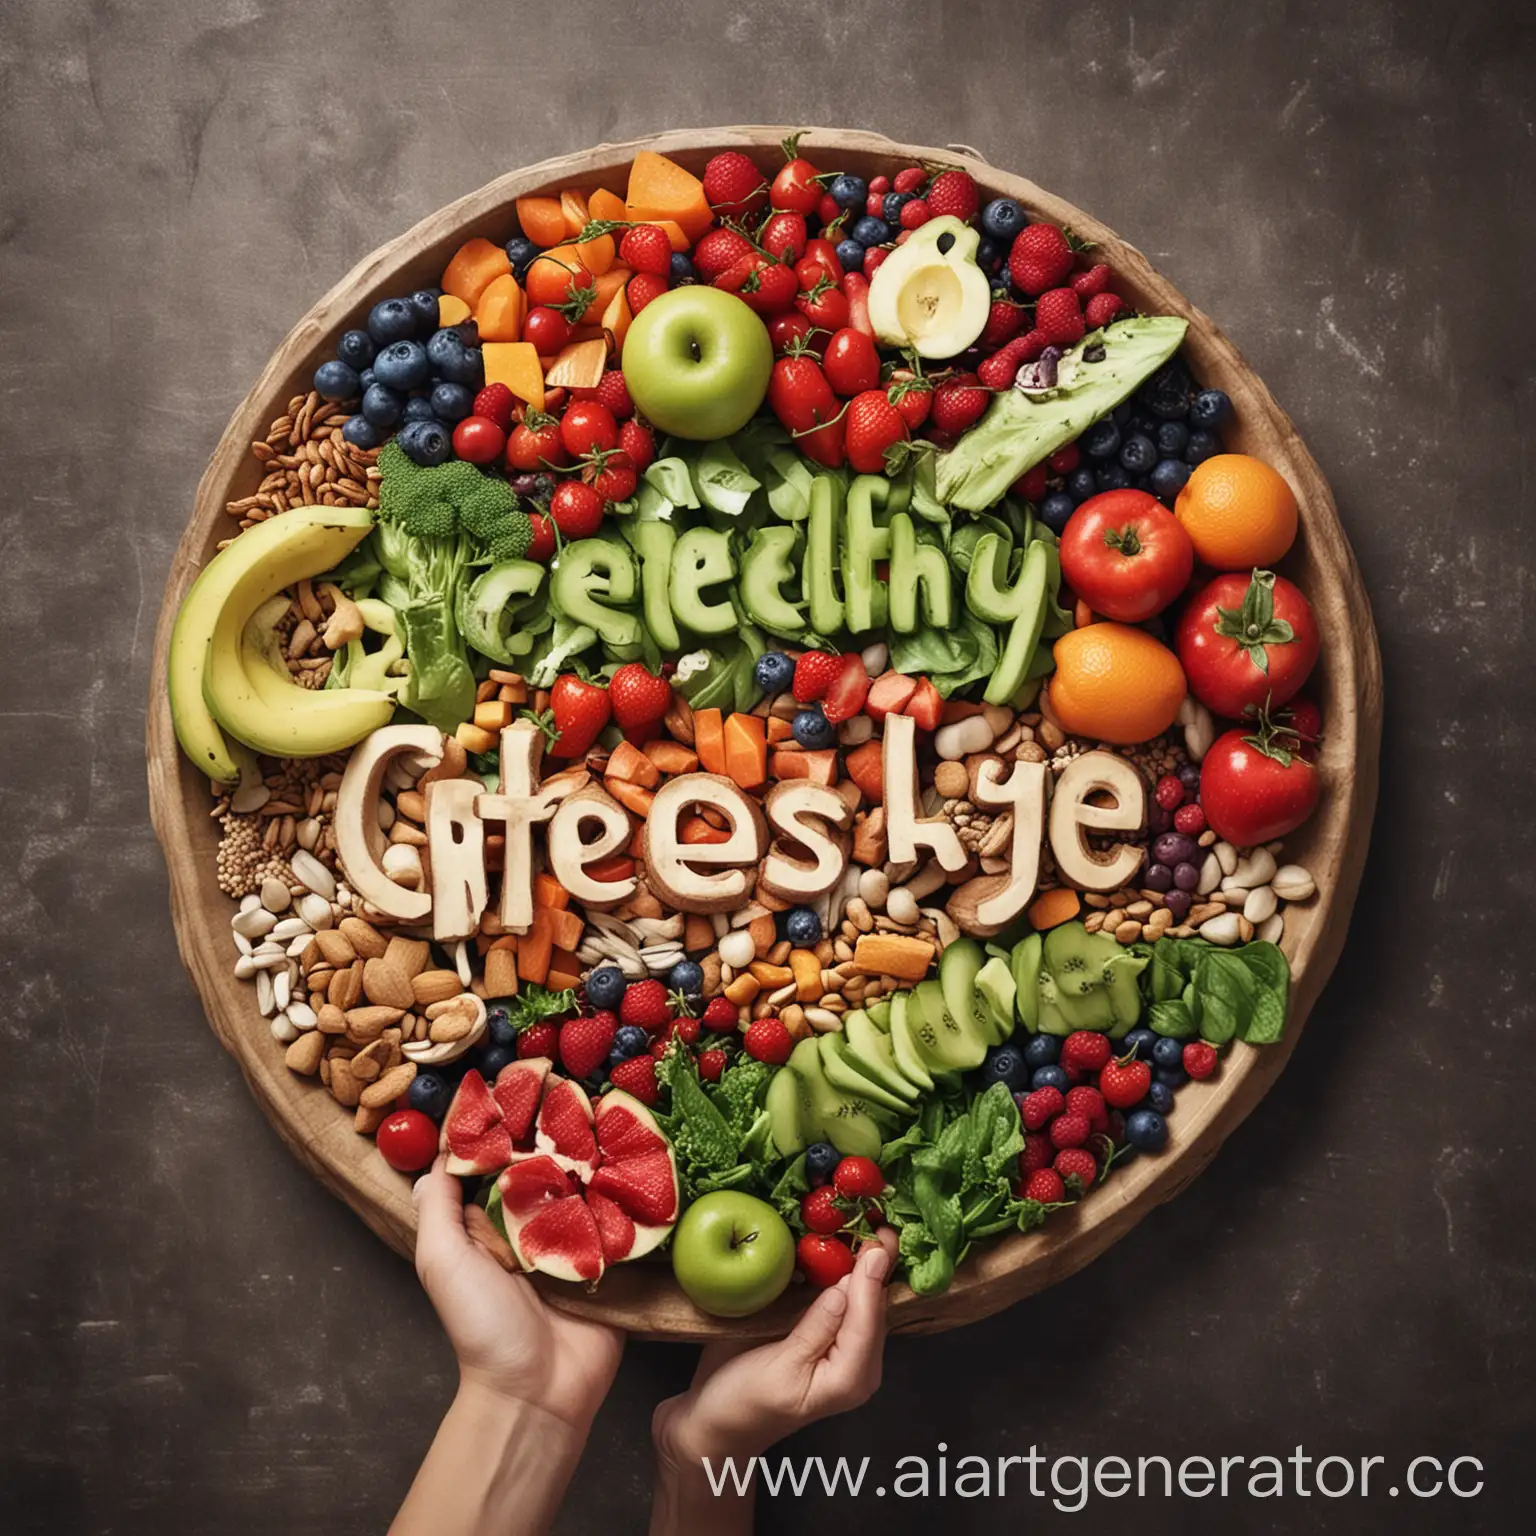 Healthy-Lifestyle-Concept-with-Fresh-Vegetables-and-Fruits